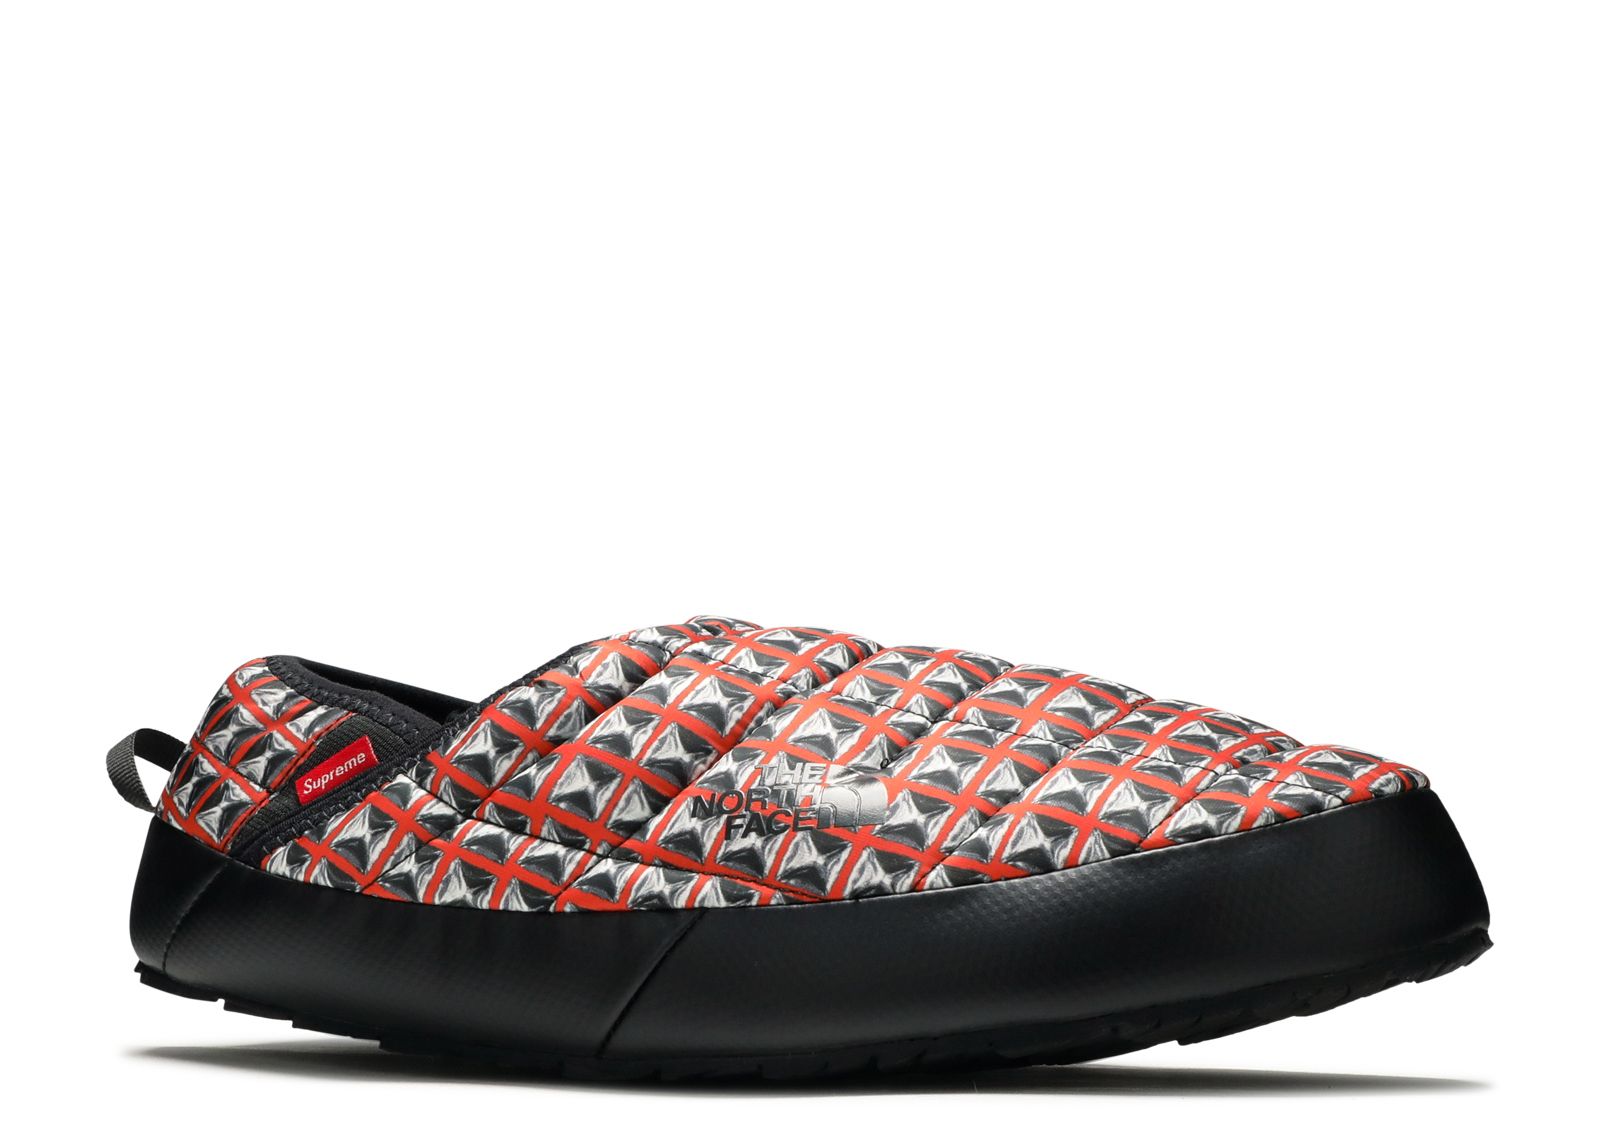 Supreme X Traction Mule 'Red Studded Print' - The North Face ...